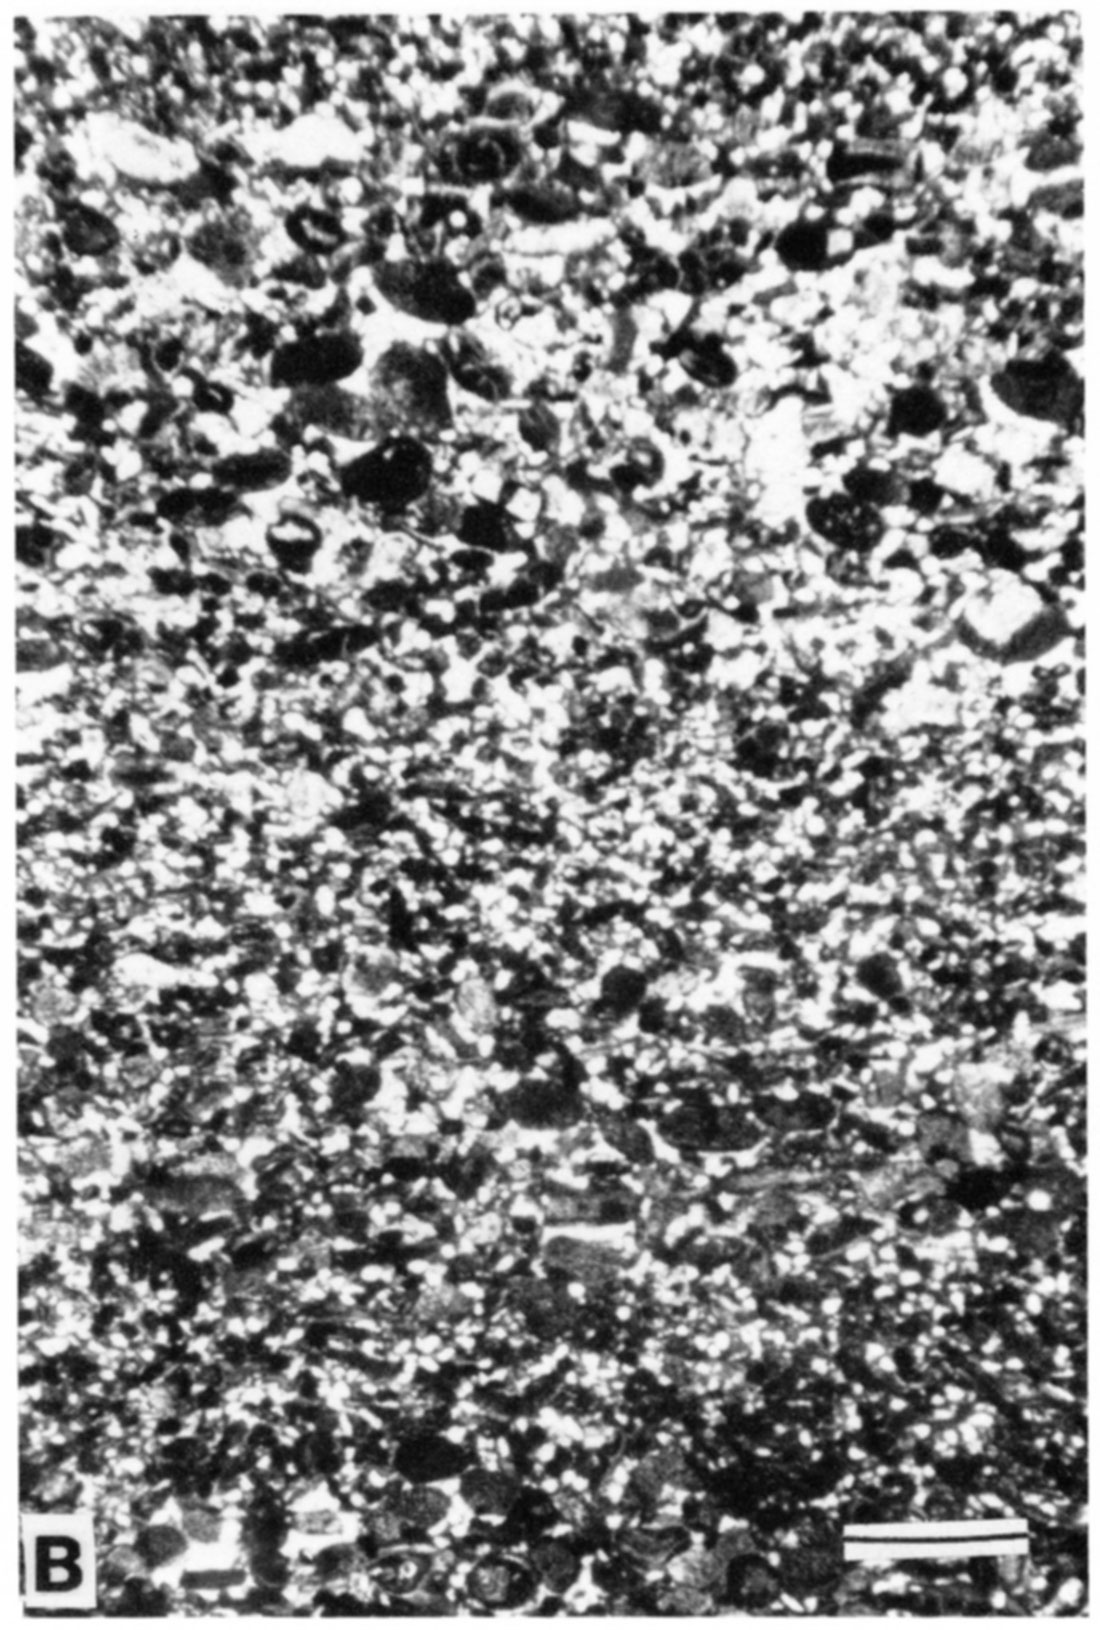 Photomicrograph of climbing translatent stratification shown in 15A. Scale bar is 1 mm.